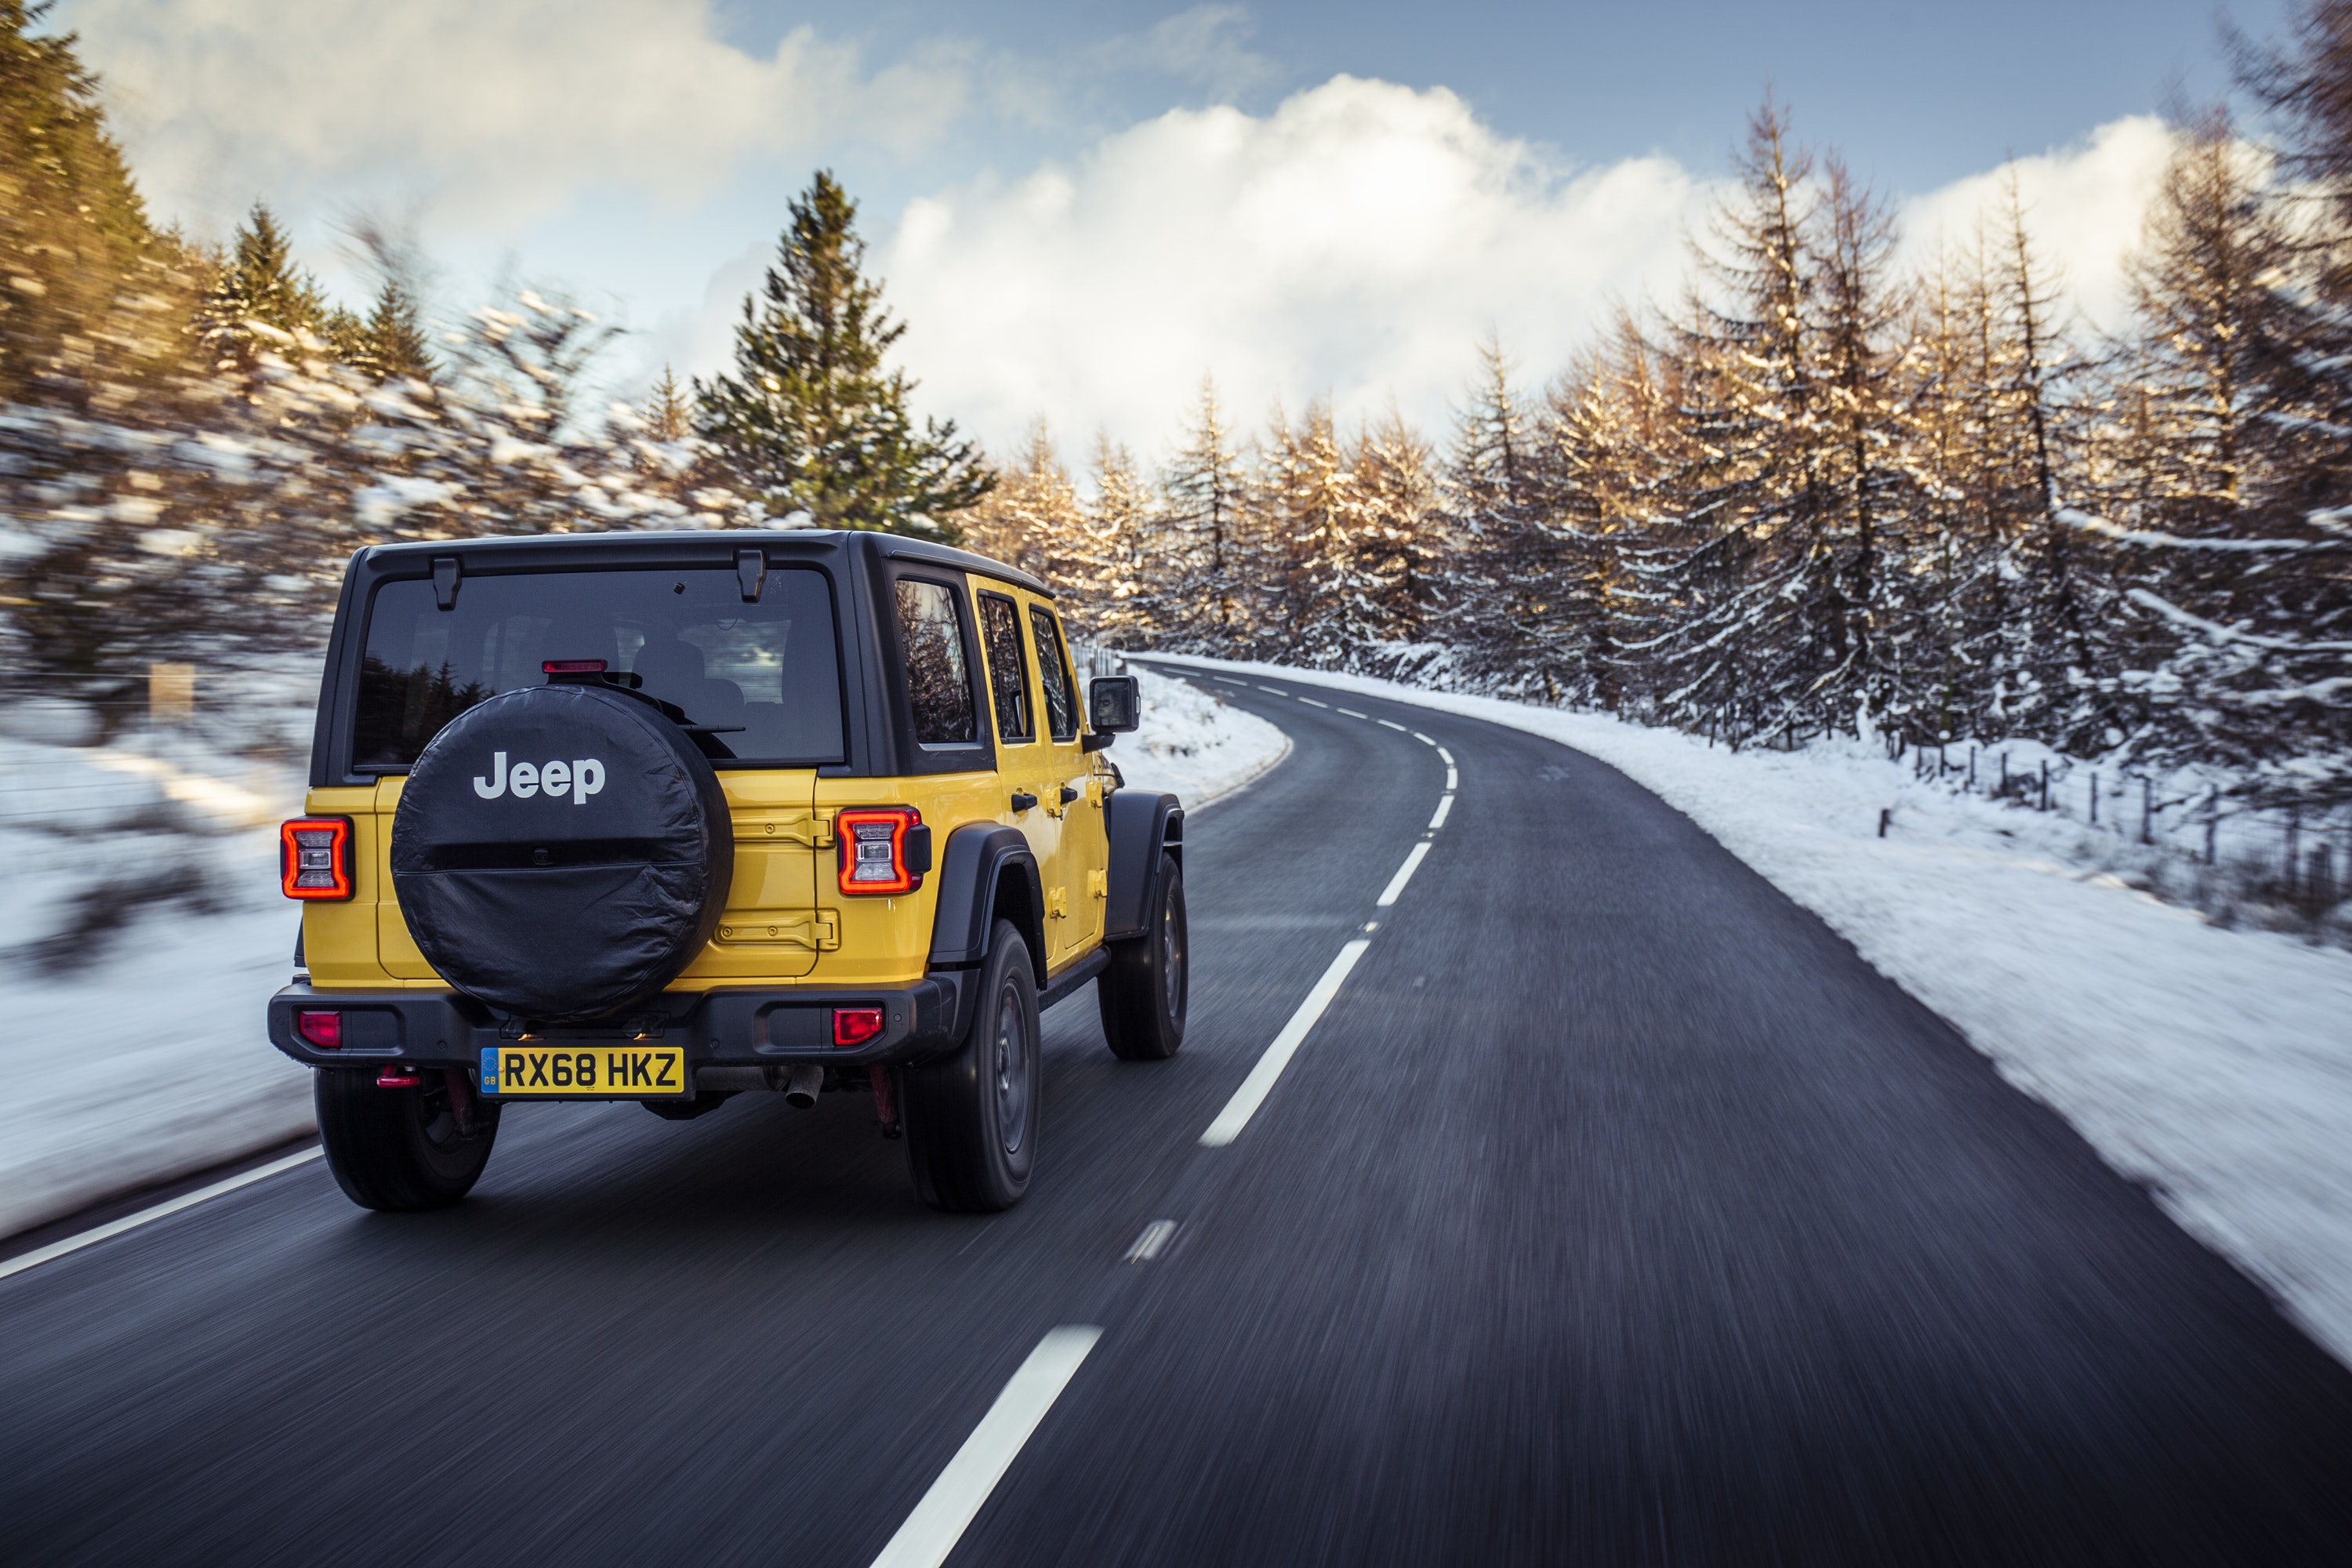 Rear view of Jeep Wrangler driving on a road